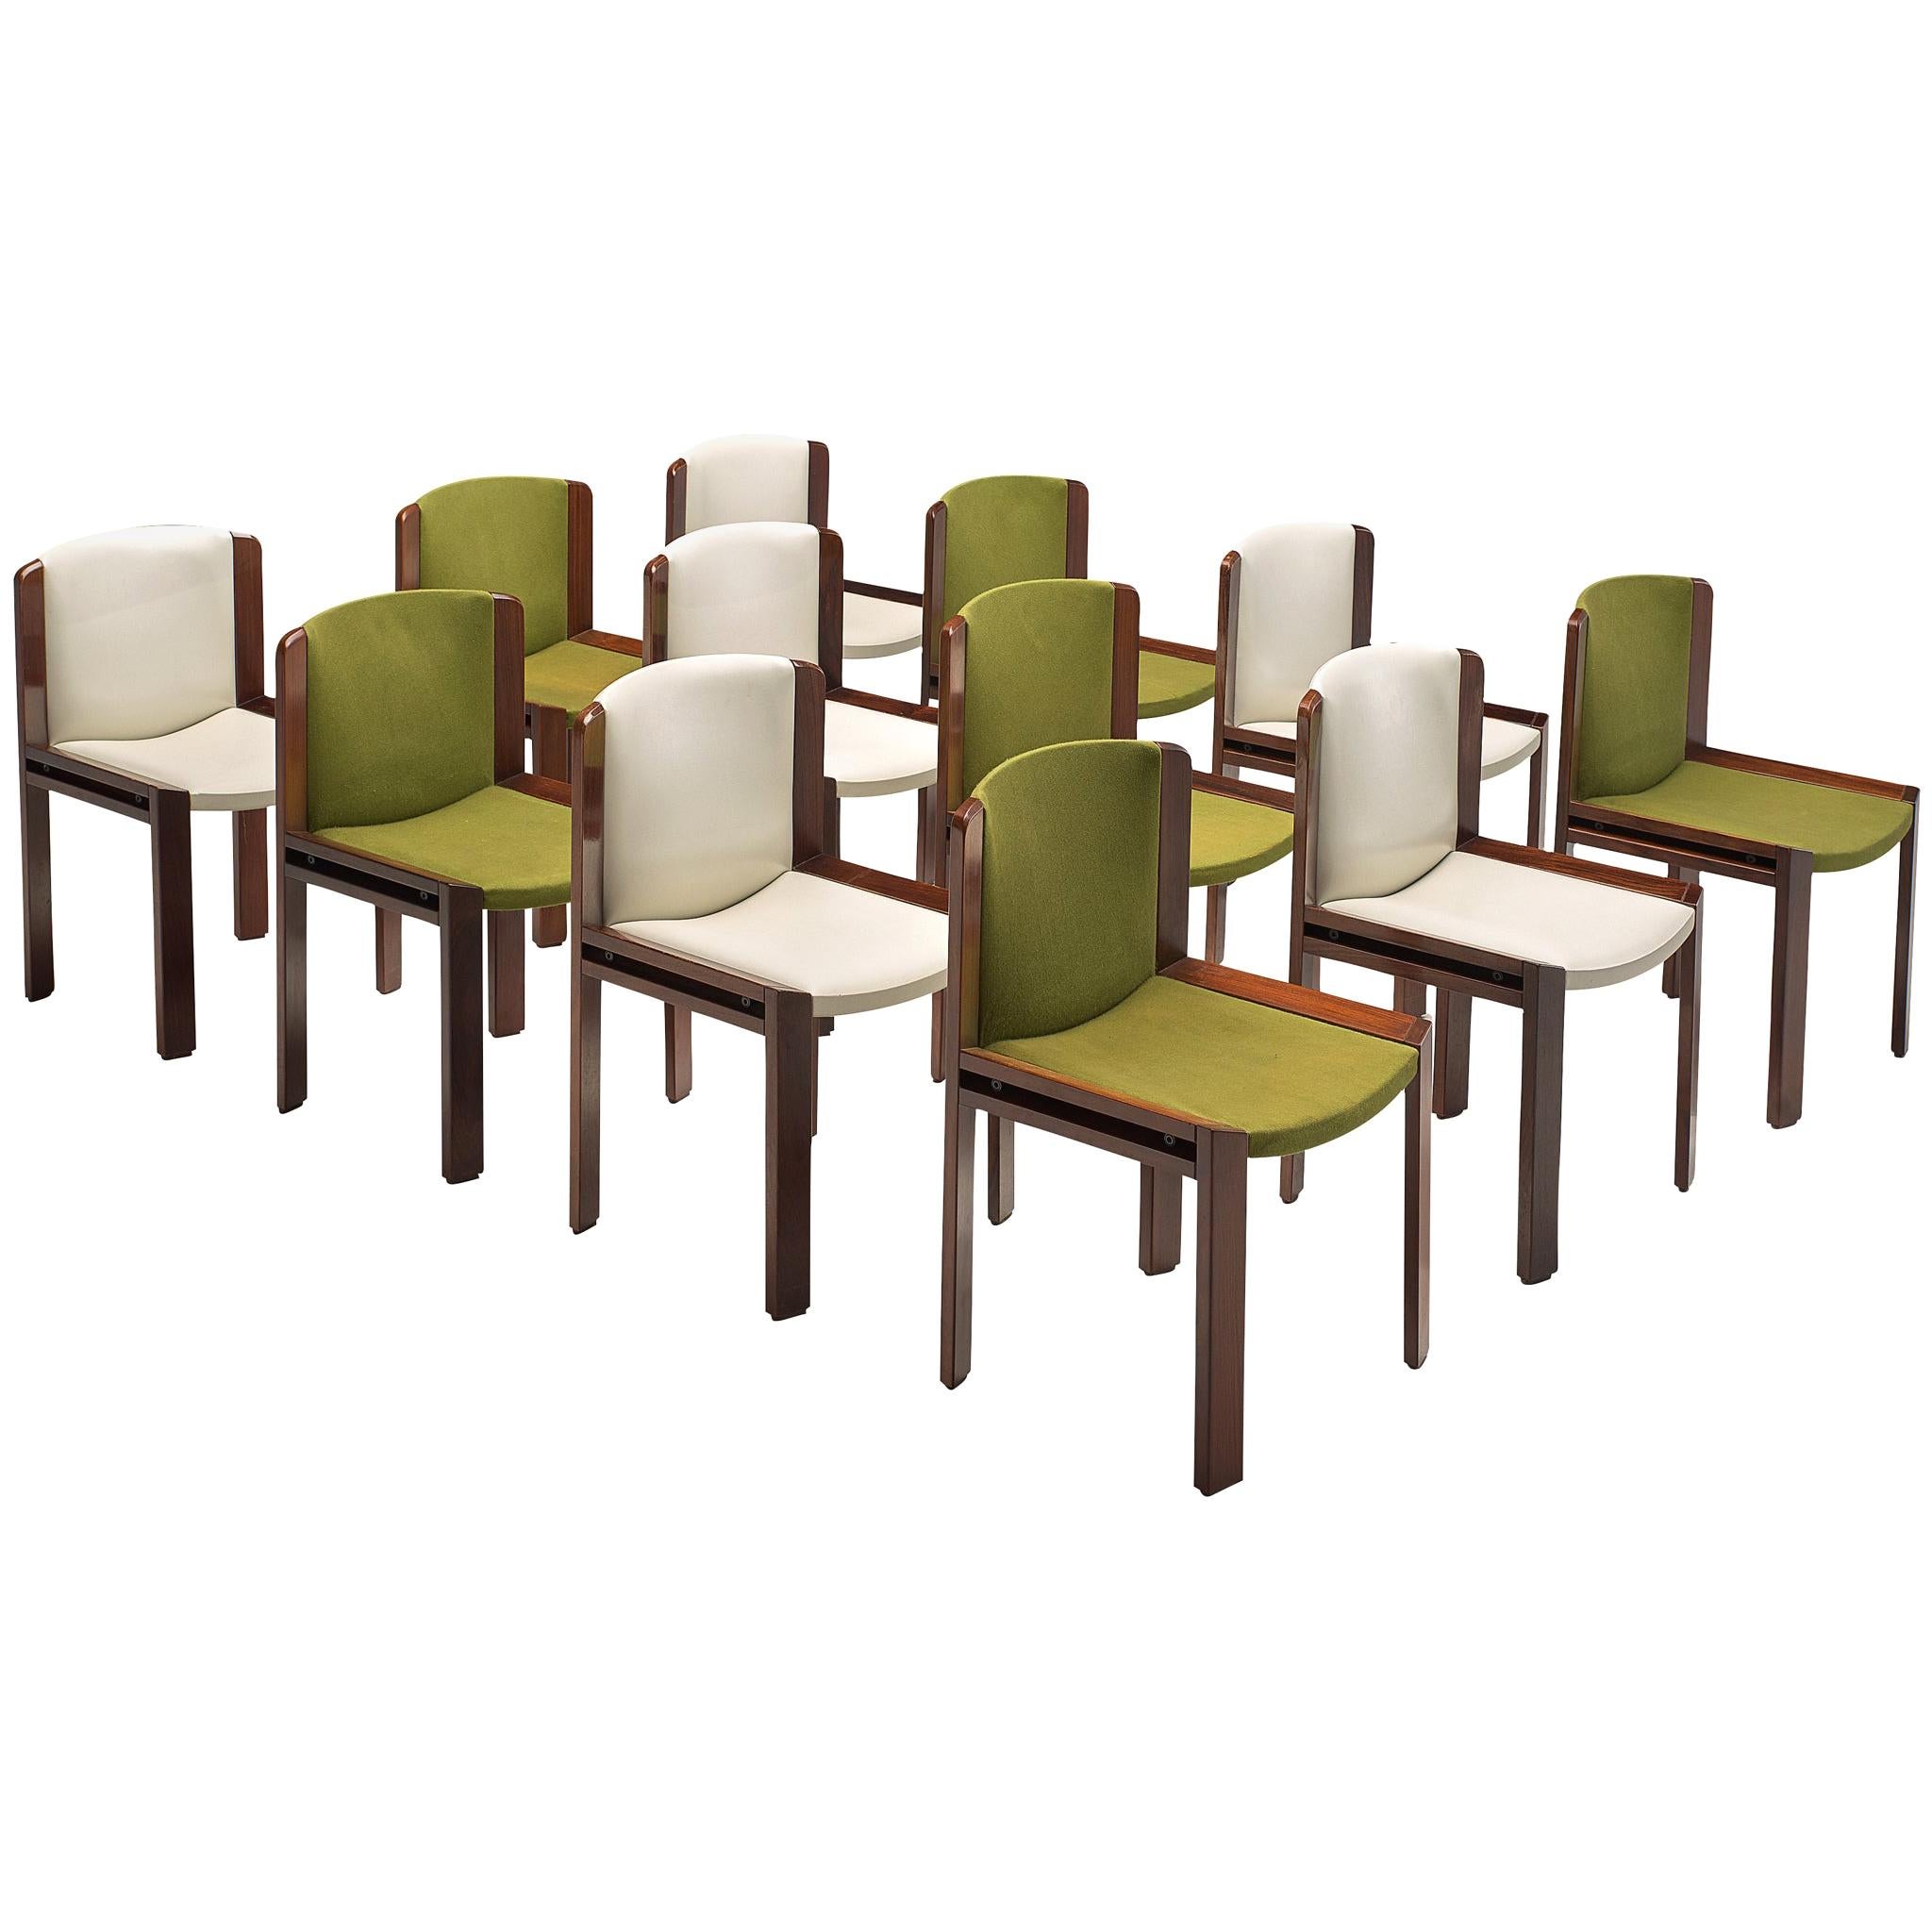 Twelve '300' Dining Chairs in White and Moss Green Upholstery by Joe Colombo